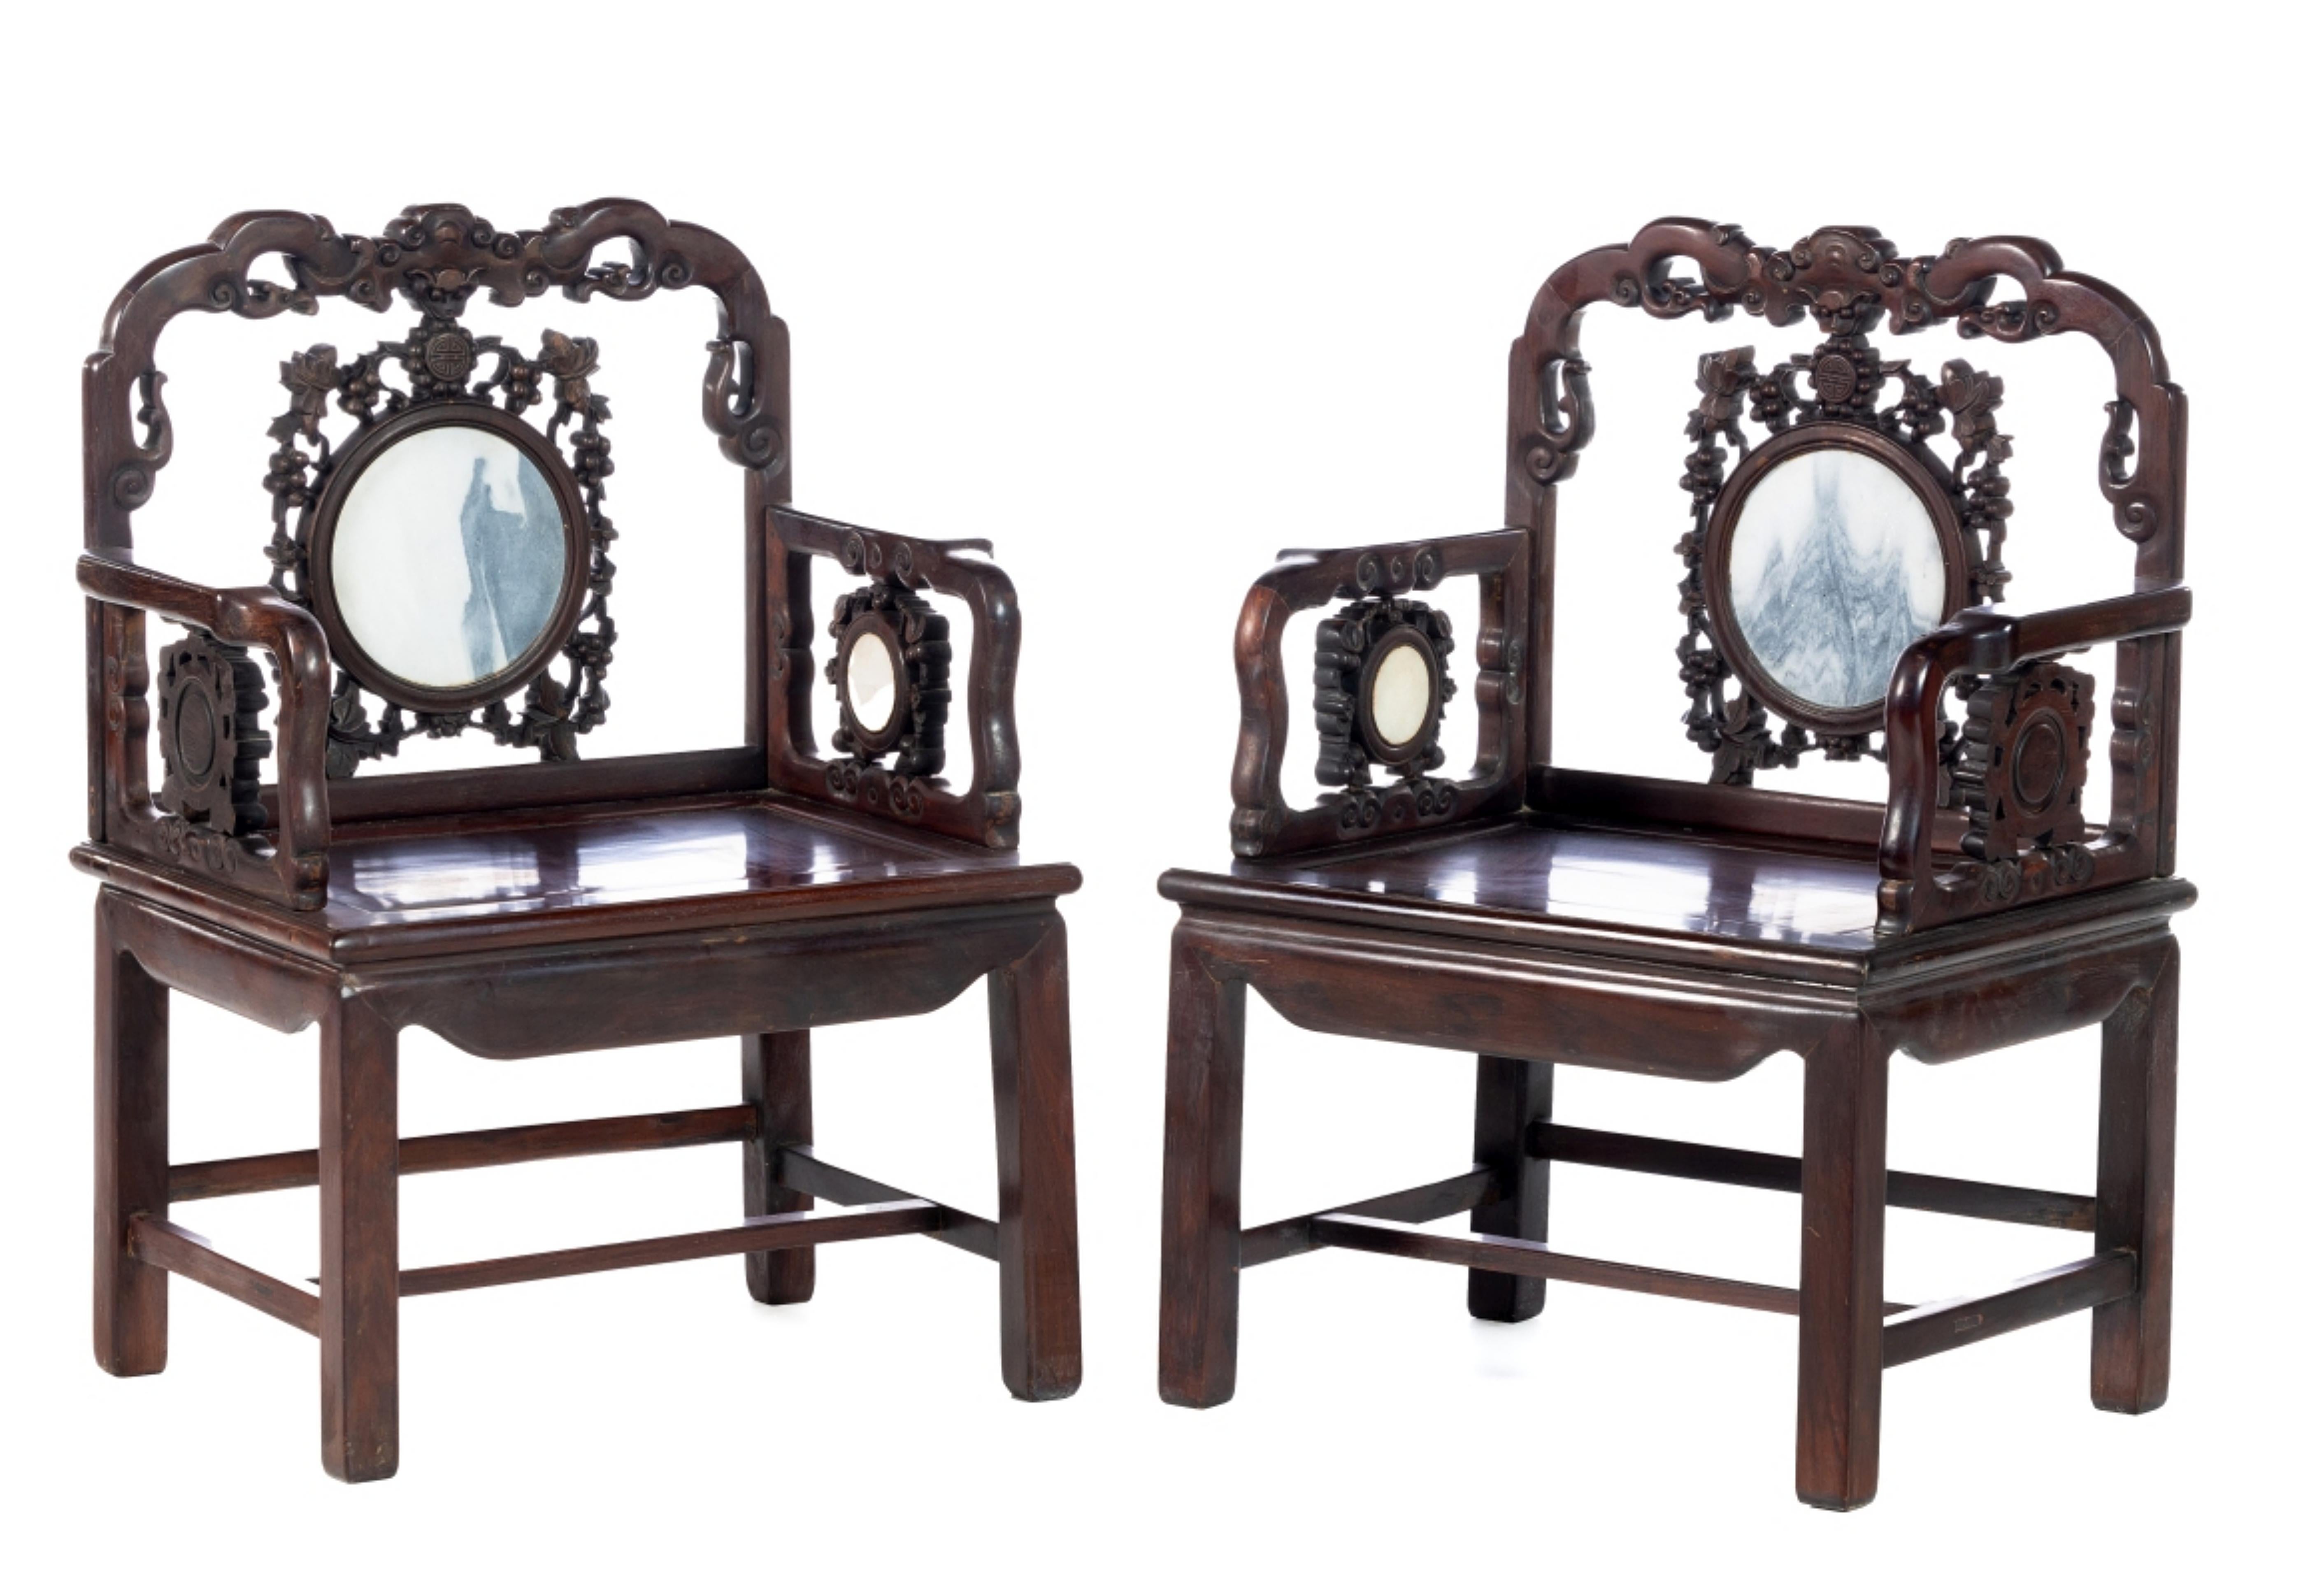 PAIR OF ARMCHAIRS

Chinese, 19th Century
in hardwood,
with carvings and marble inserted.
Dim.: 88 x 64 x 46 cm
good conditions